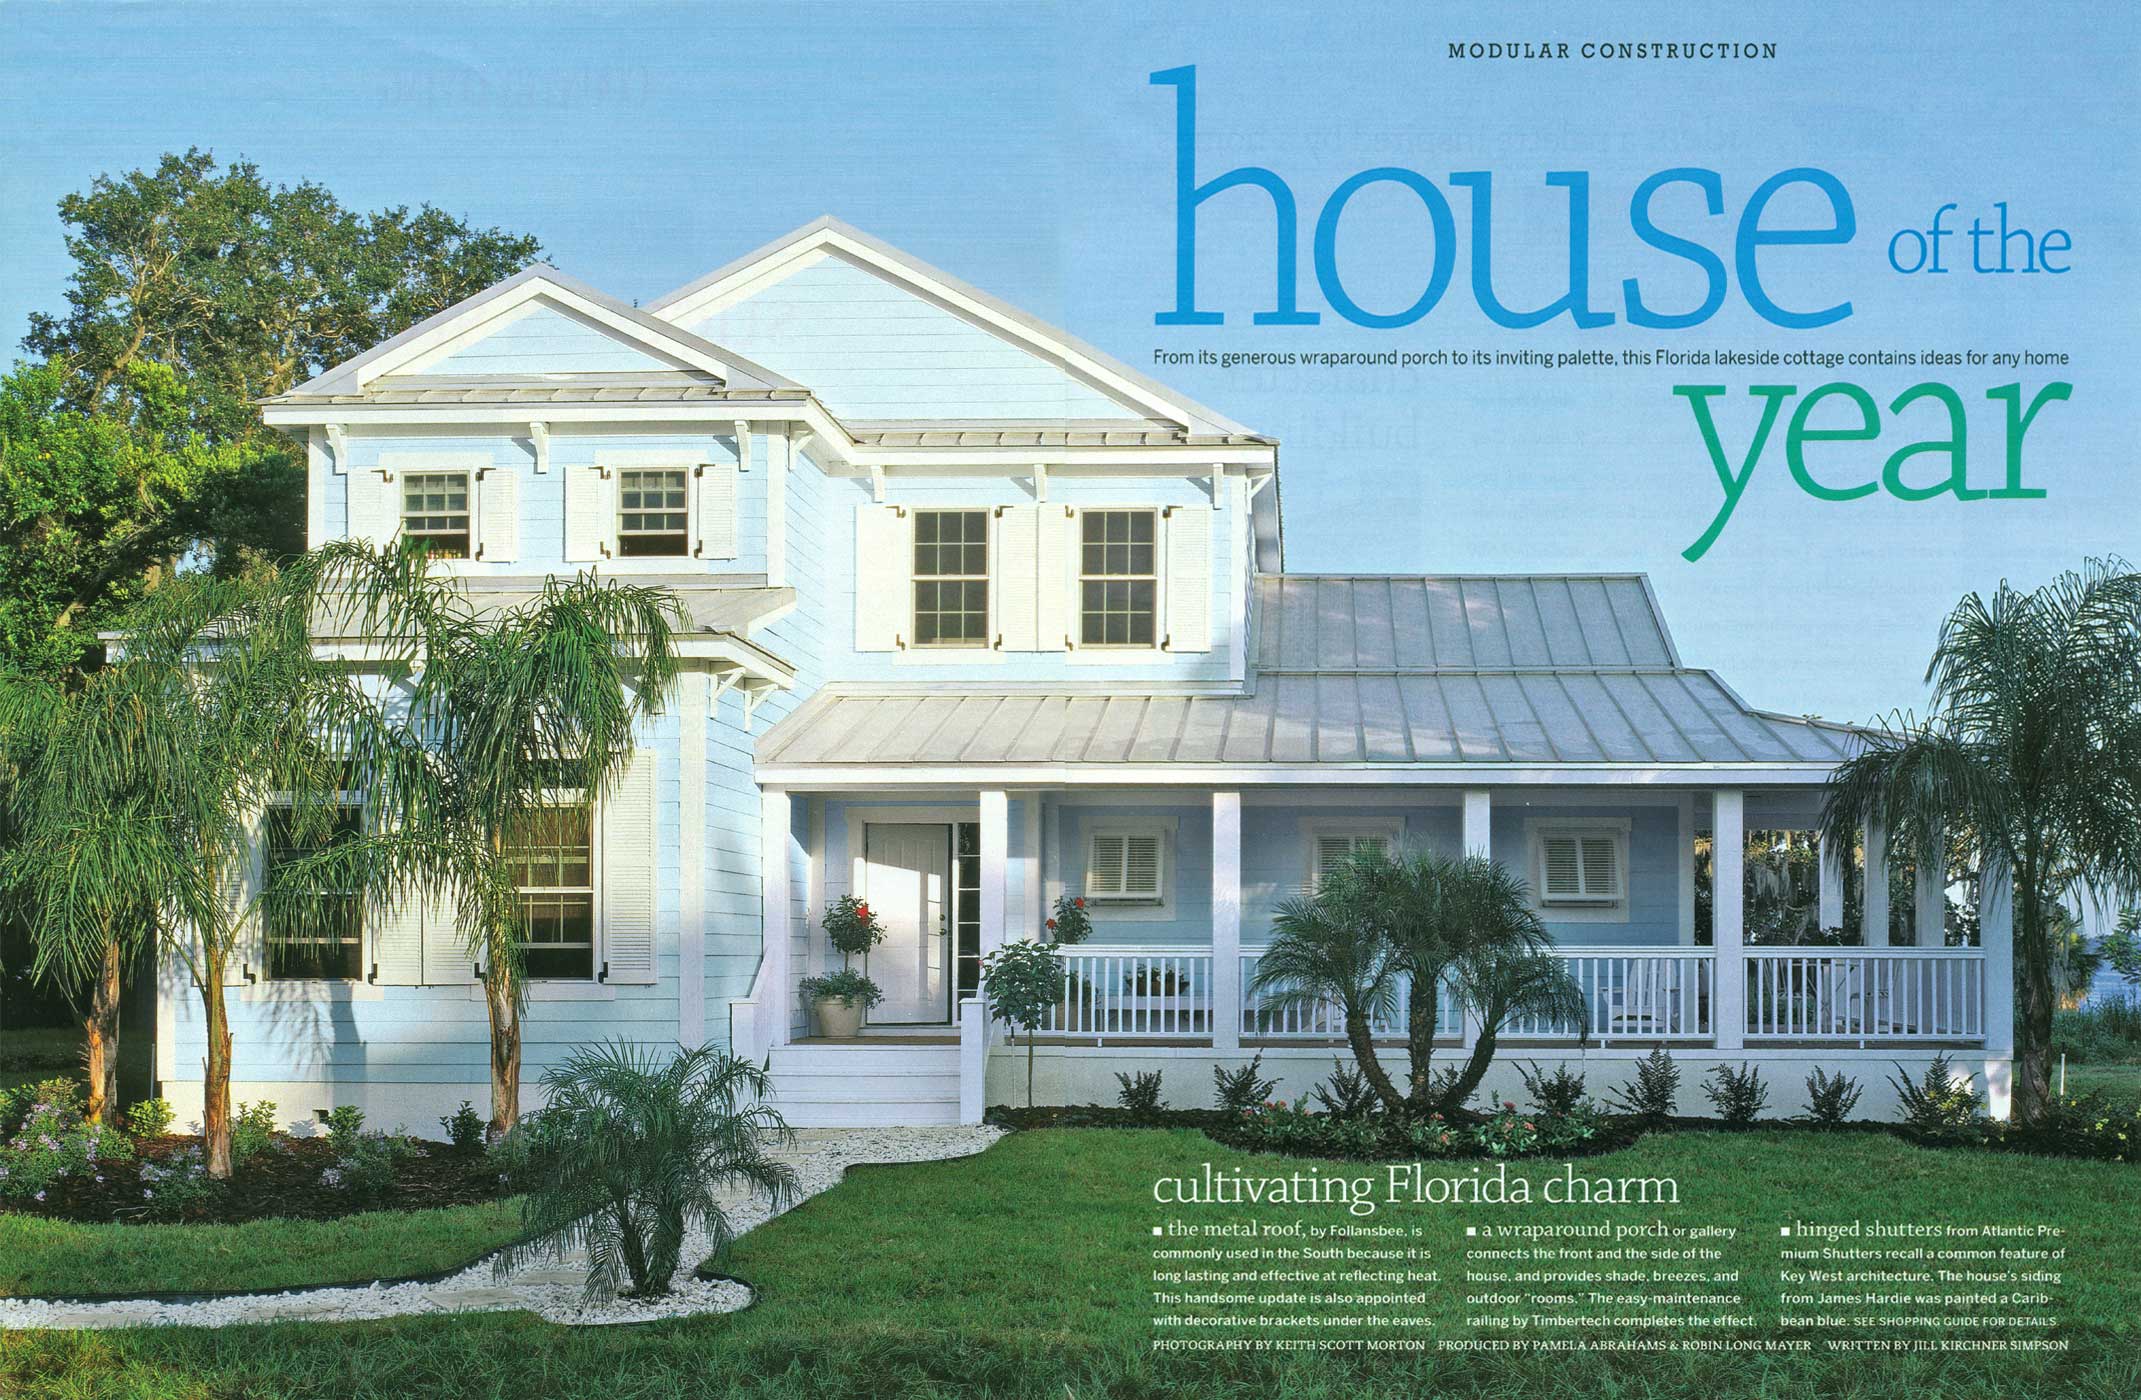 Country Living Magazine features New England Classic American ...